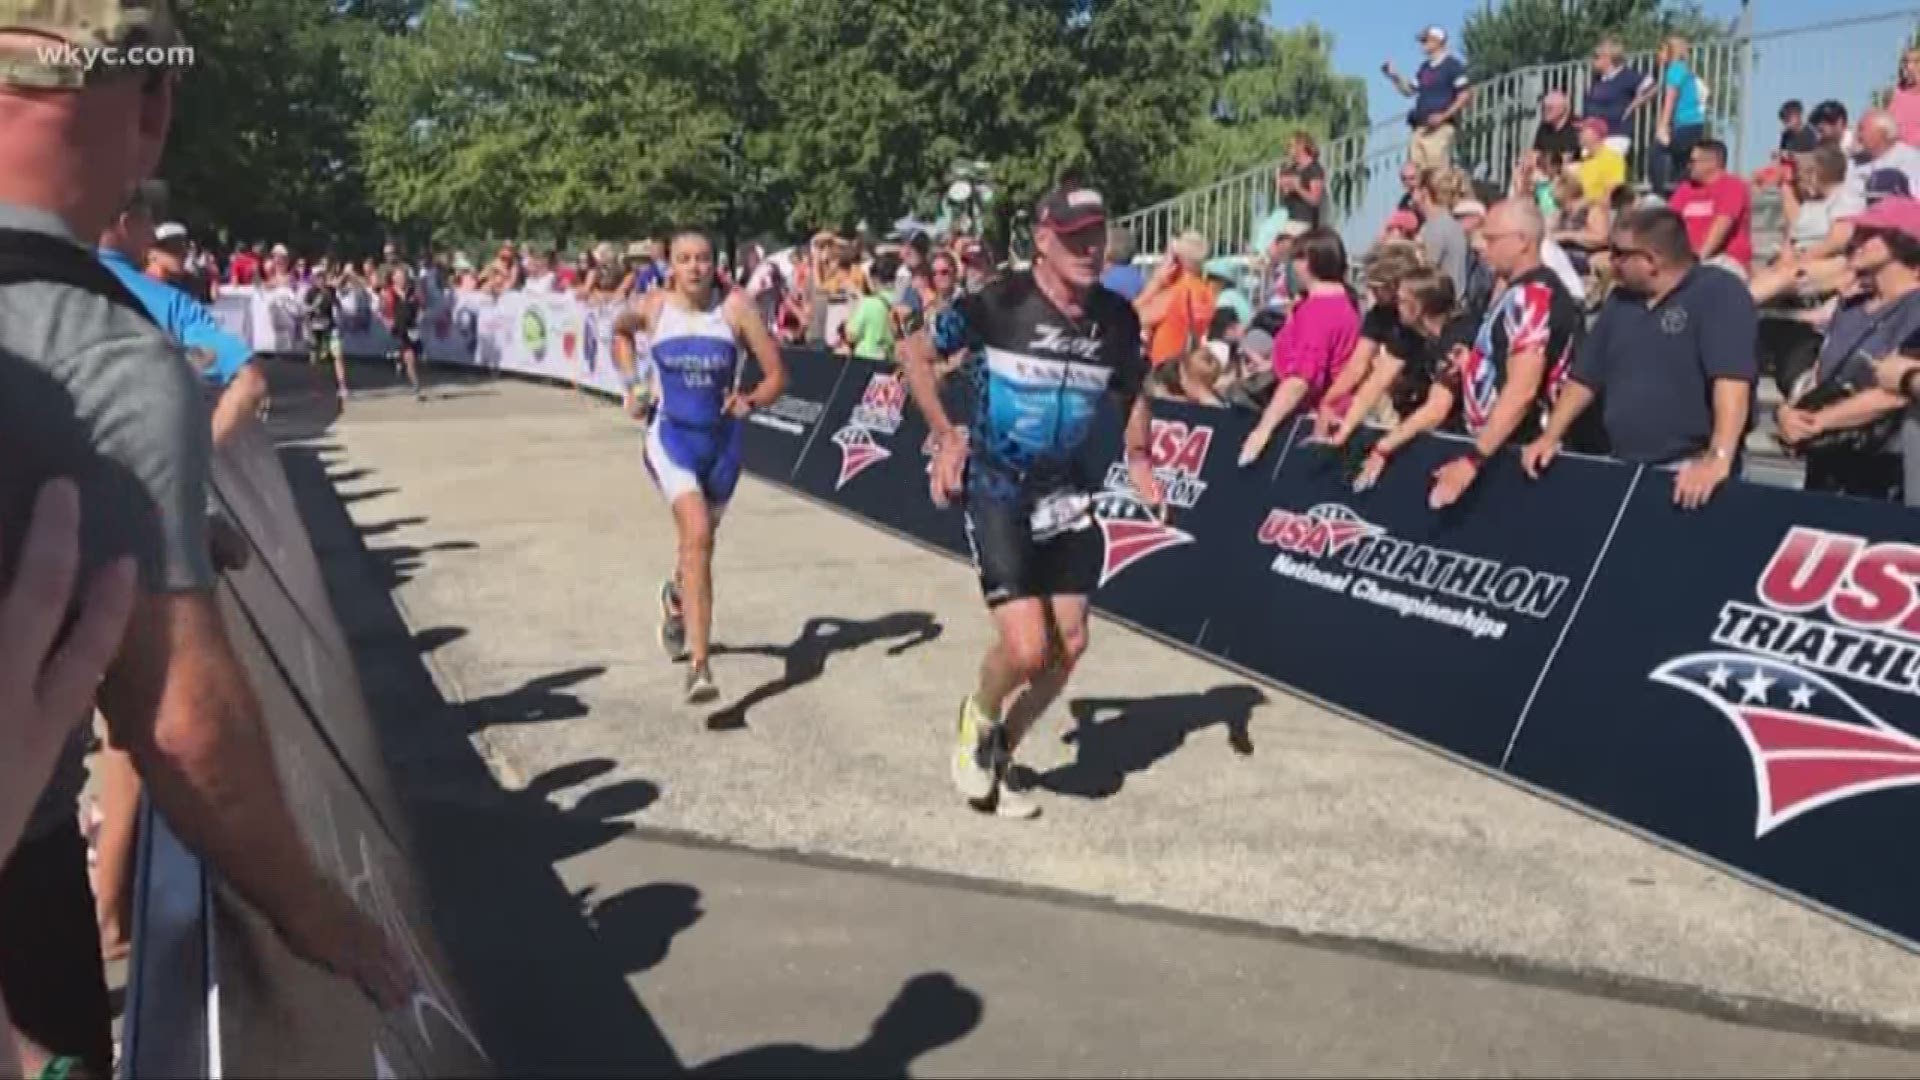 The USA Triathlon is expected to bring about 5,000 athletes to Cleveland this weekend. It's also expected to create road closures that will impact both the east and west sides of the city.